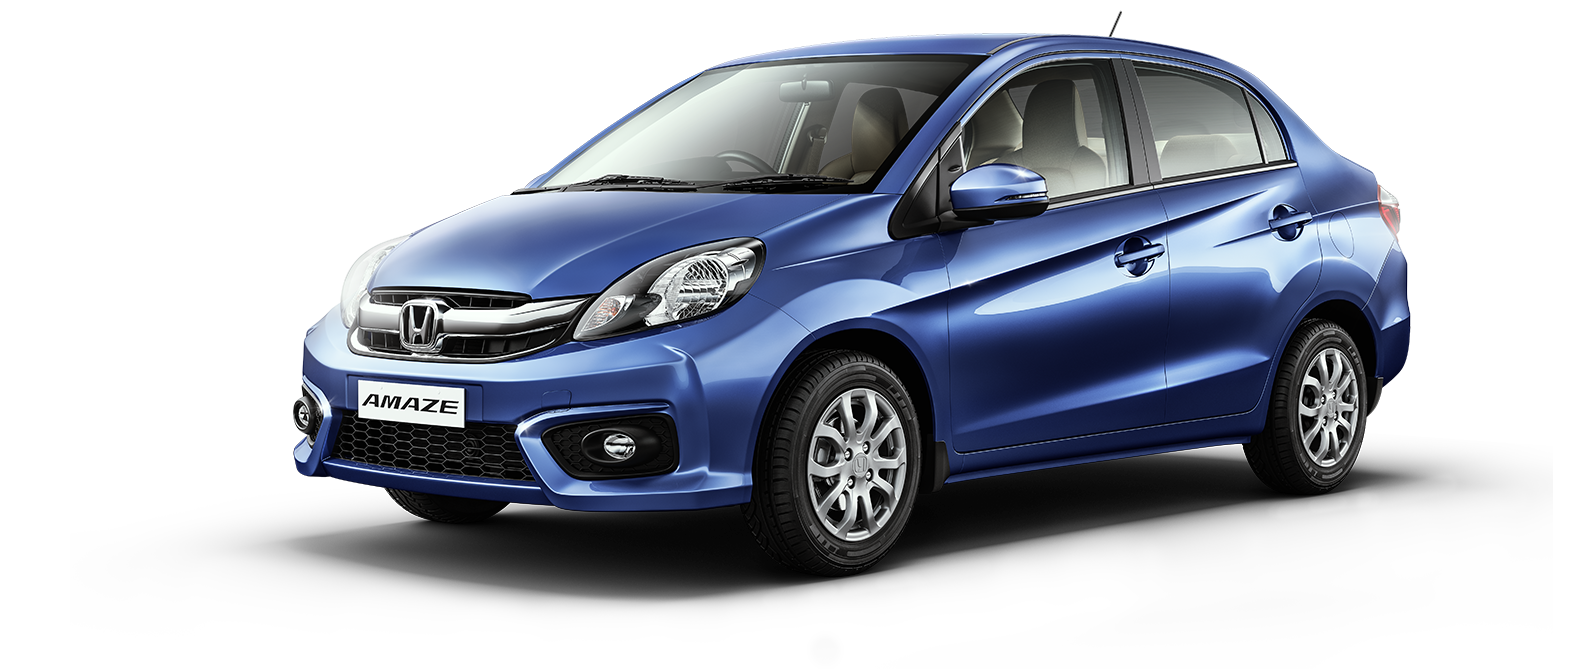 Honda Amaze facelift 2016 at official page